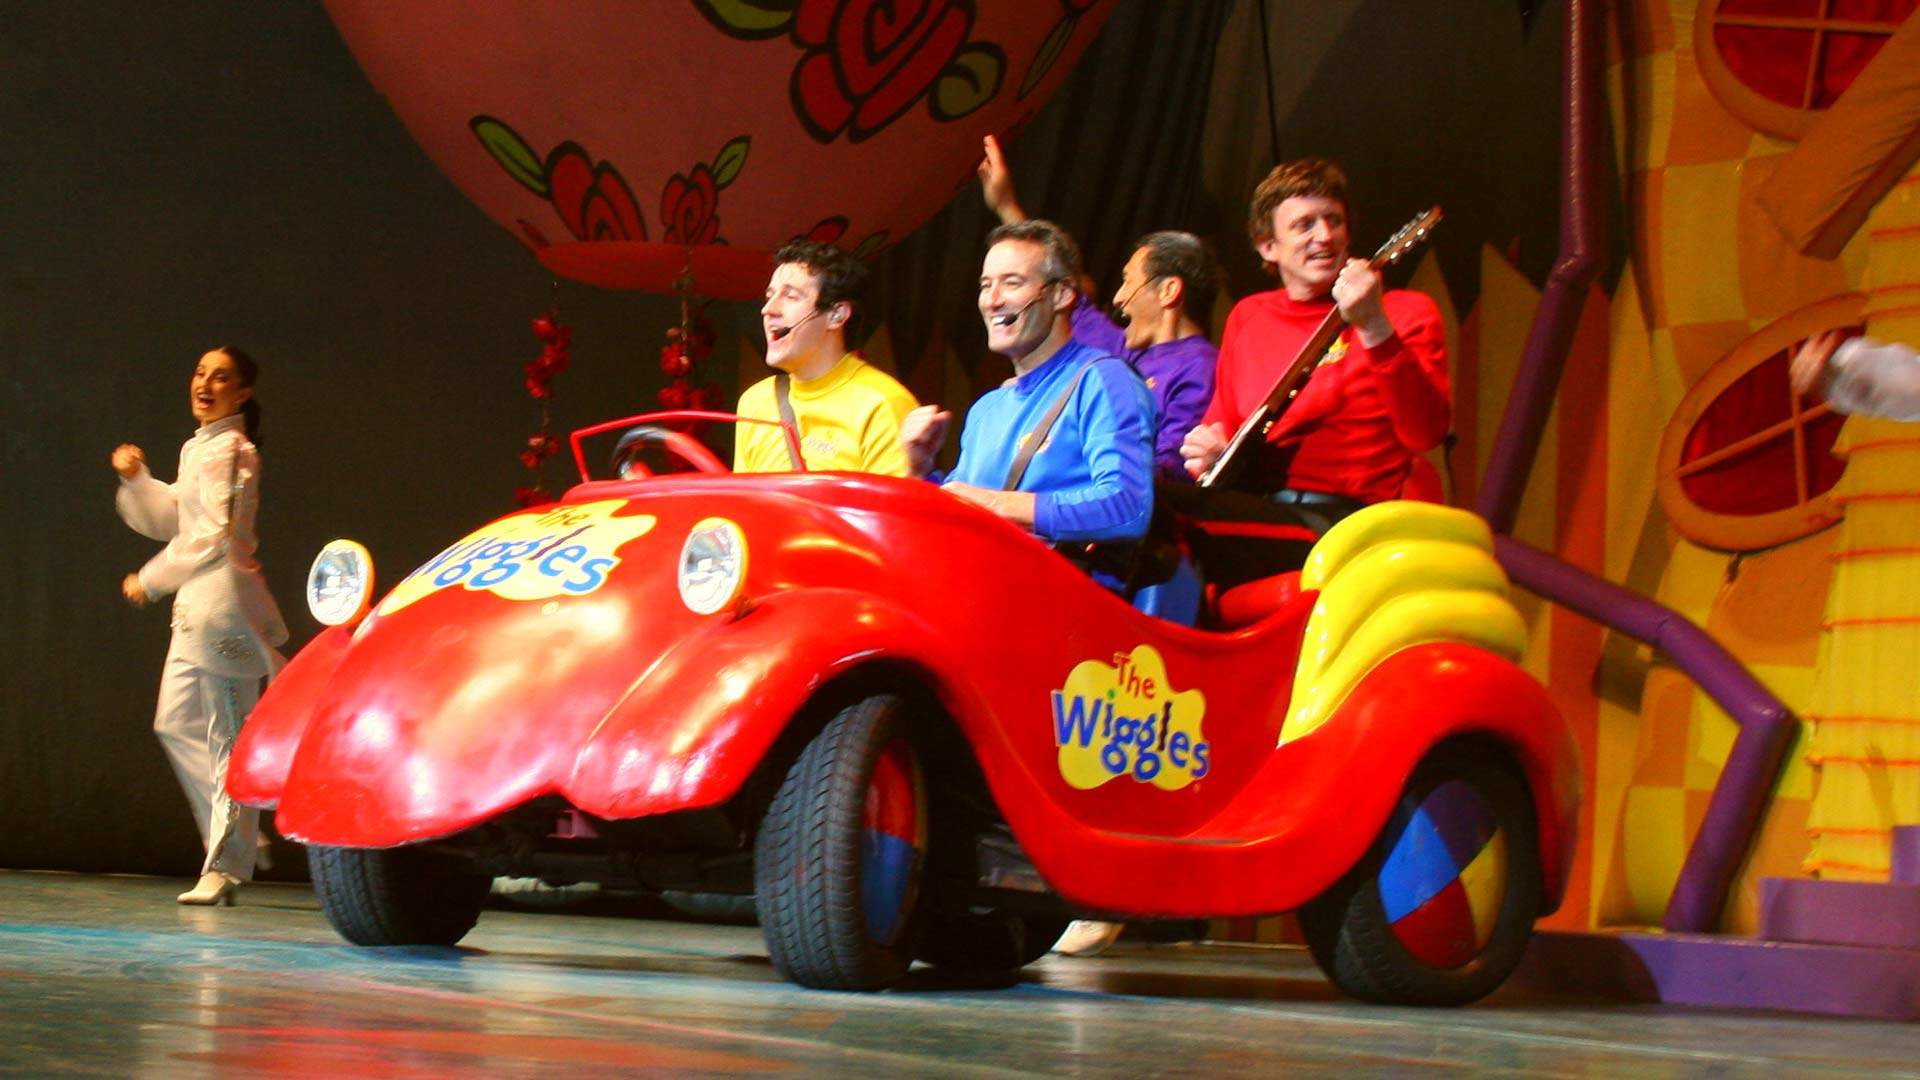 Prime Video Is Bringing a Documentary About The Wiggles to Your Streaming Queue in 2023